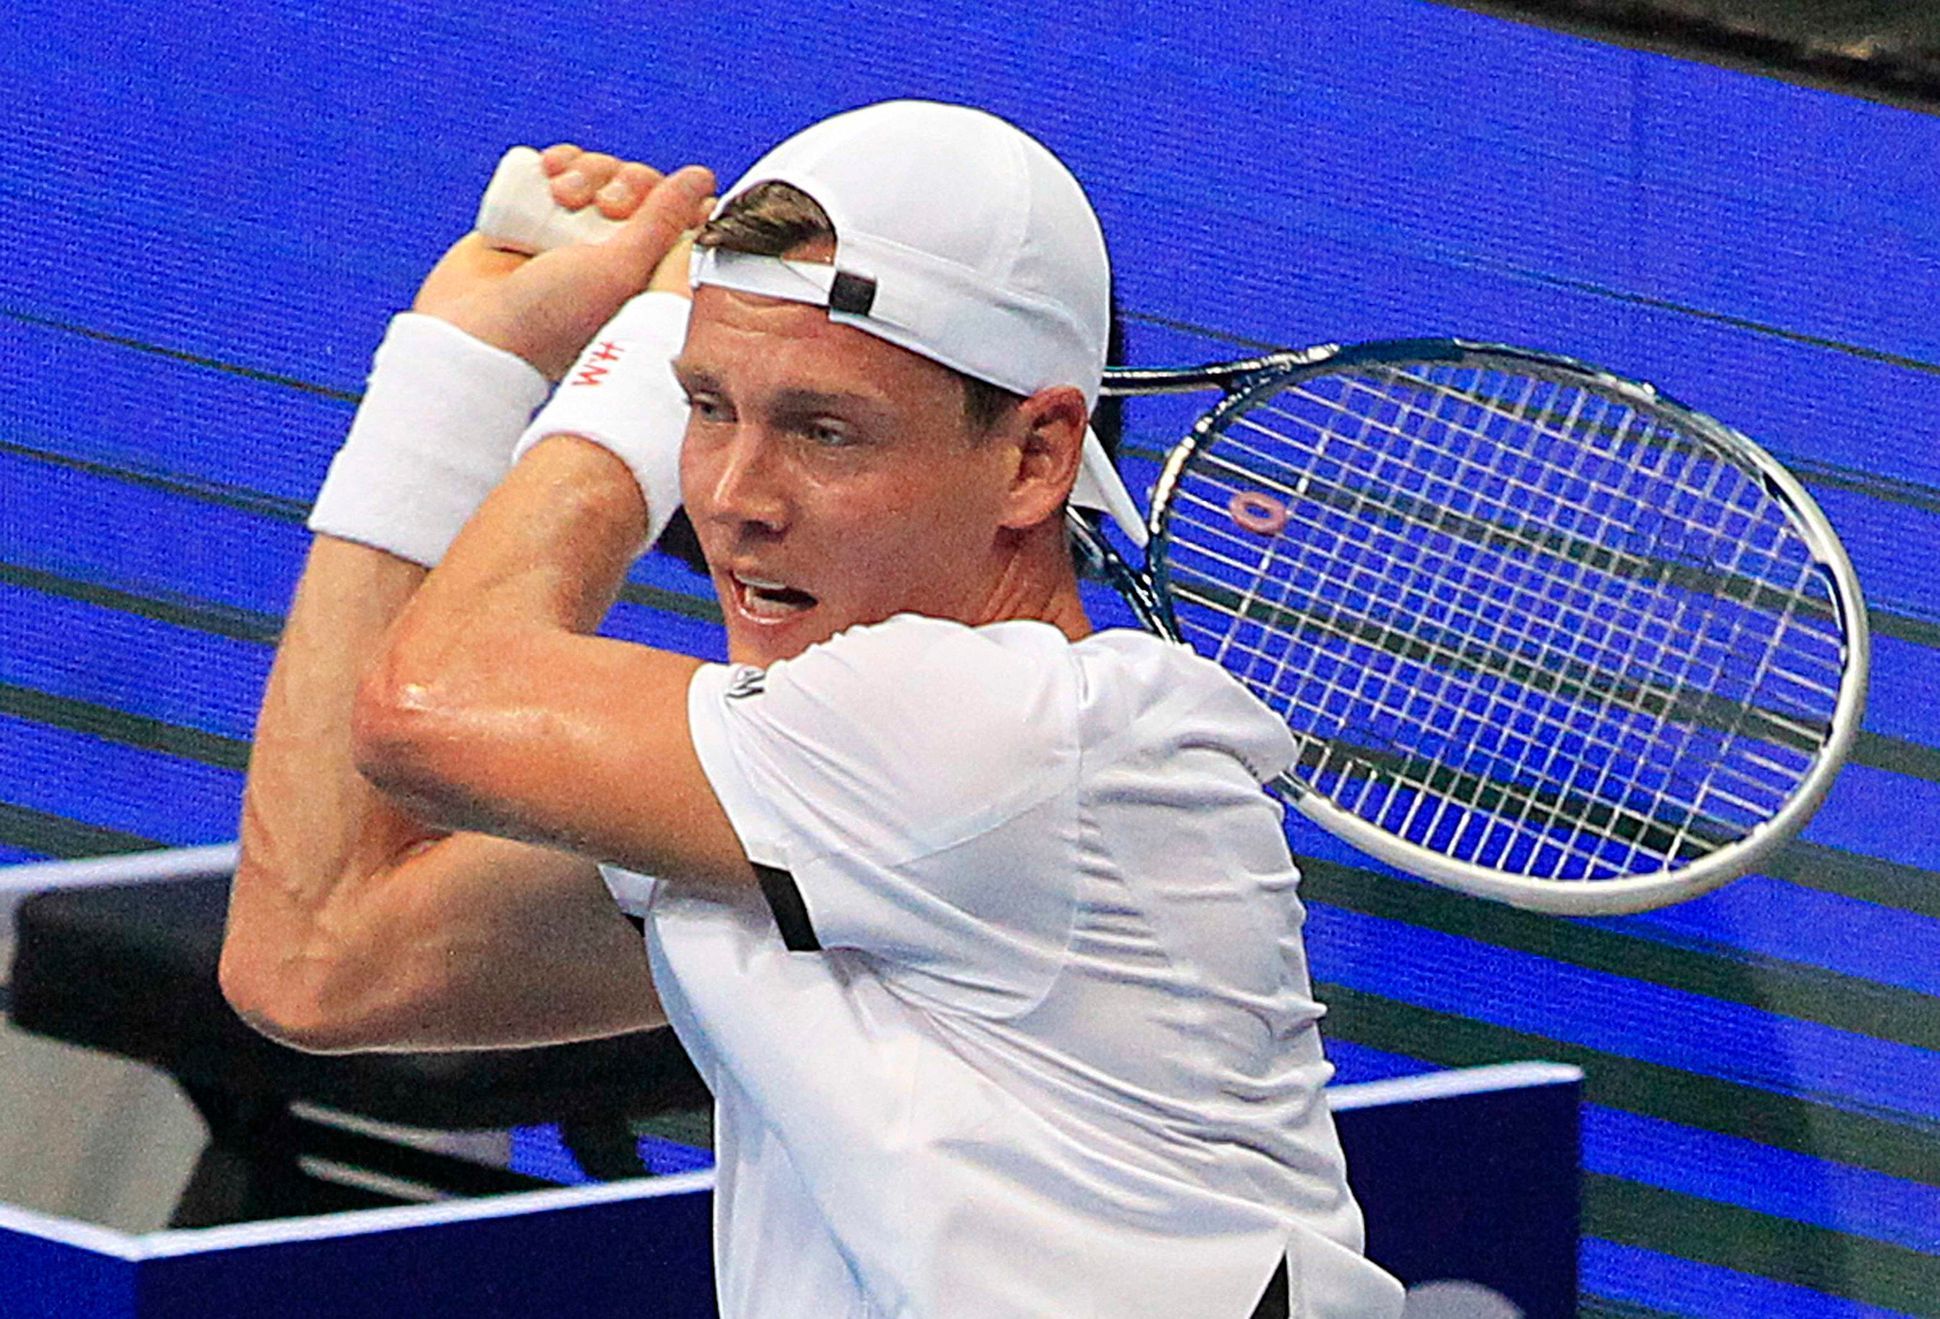 Berdych of the Singapore Slammers returns a shot to Cilic of the UAE Royals during their men's singles match at the International Premier Tennis League in Manila